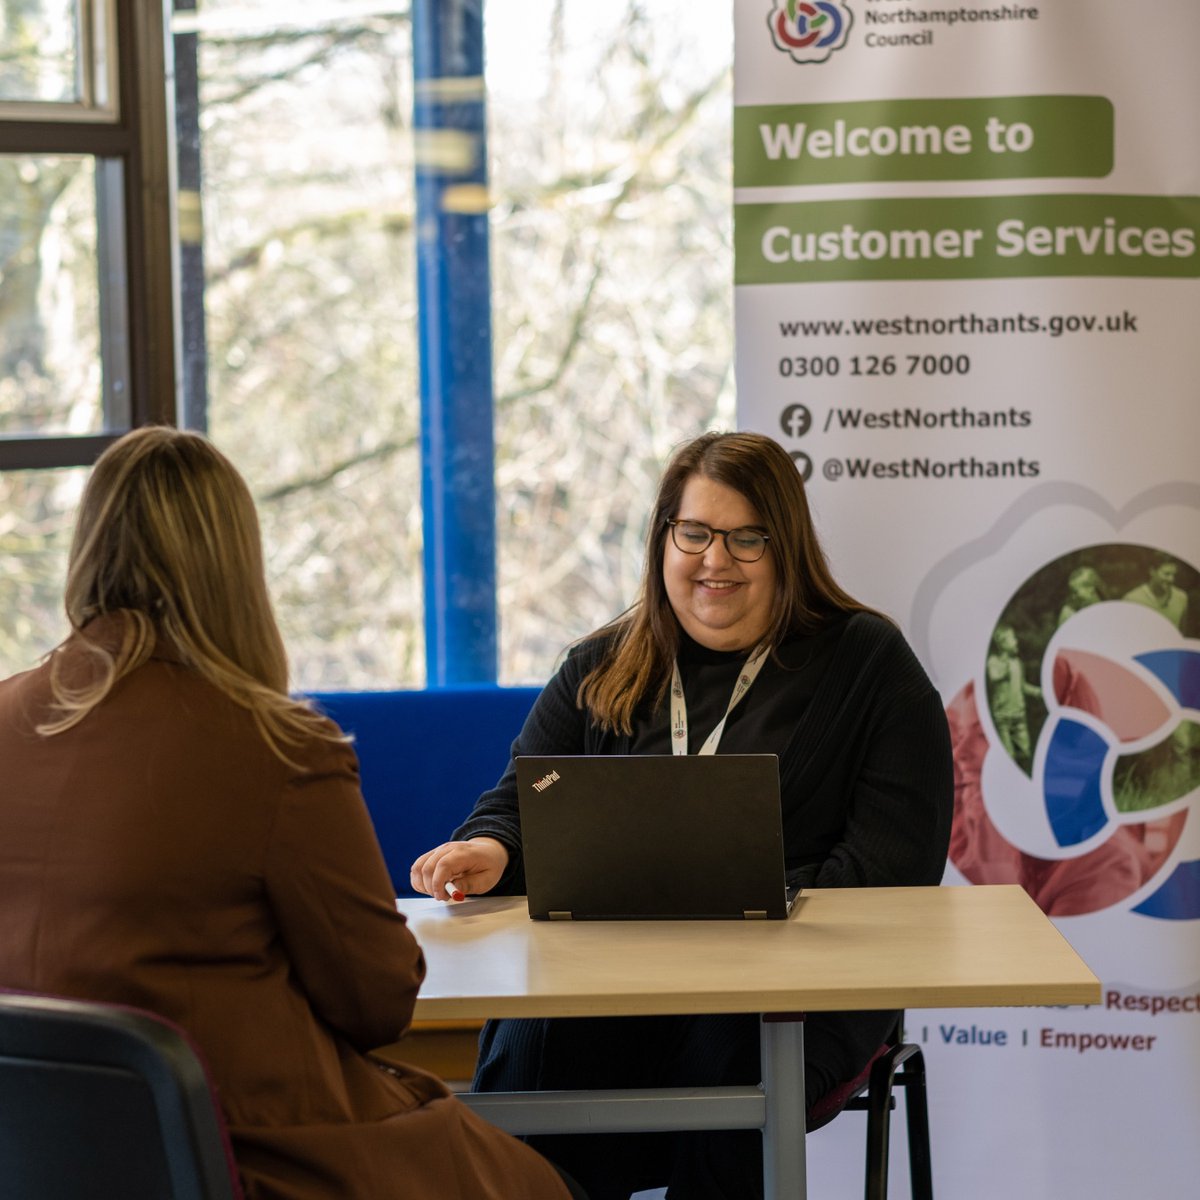 Chat with our Customer Services team at these drop-in sessions this week: ◼️ Wed 8 May: Brixworth Village Hall, 3.30 - 4.30 pm ◼️ Thu 9 May: St Marys, Far Cotton, 12.15 - 1.45 pm ◼️ Fri 10 May: Long Buckby Library, 10.30 - 12.30 pm Find more details: ow.ly/TbnY50QCGEJ